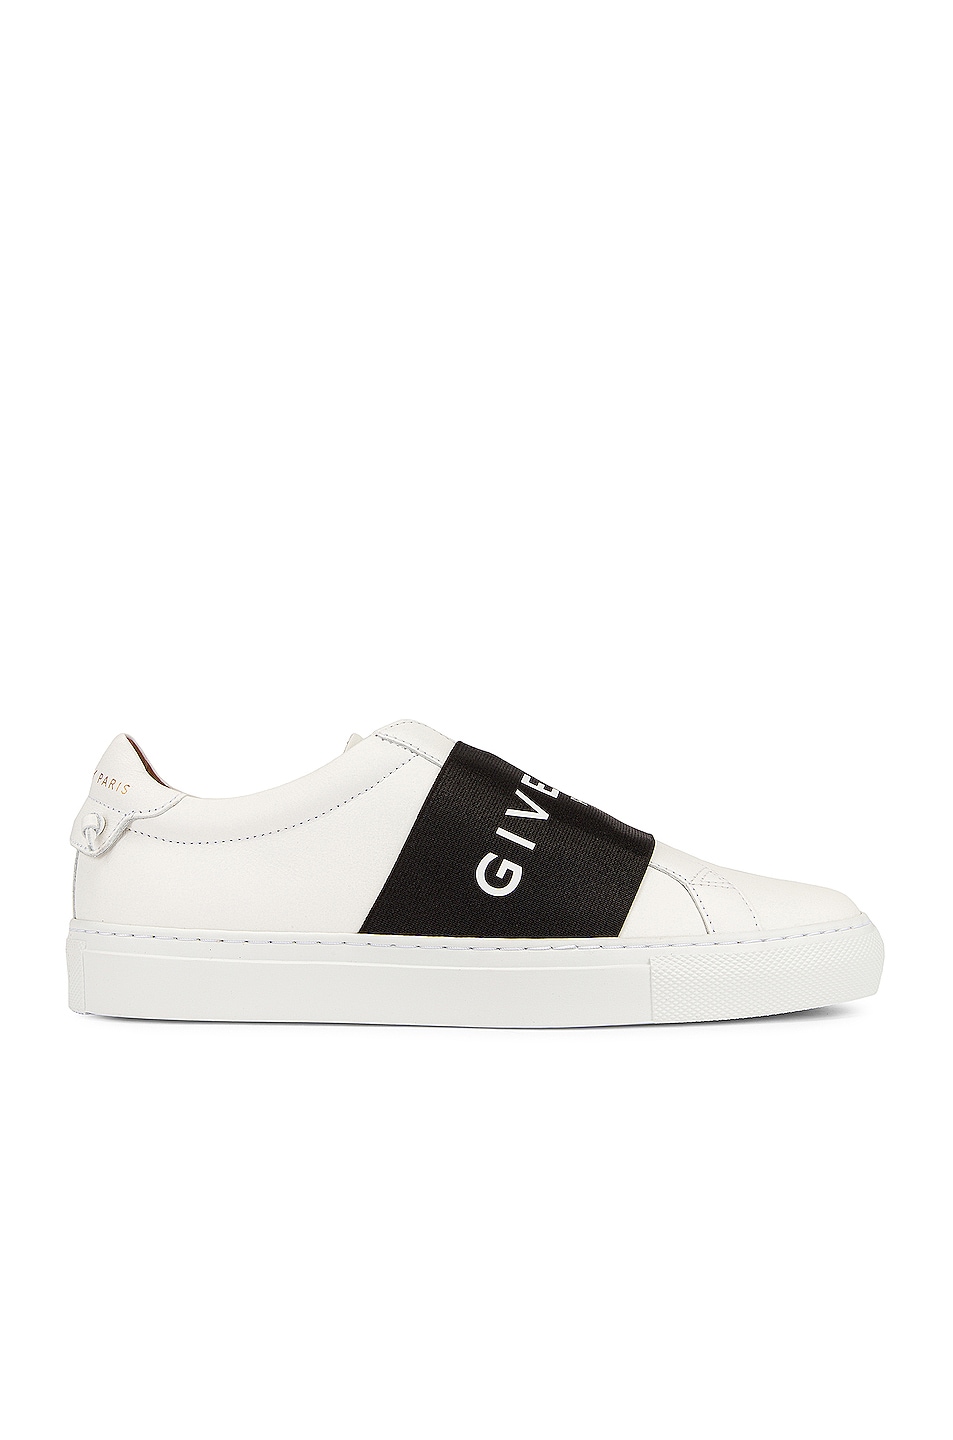 Image 1 of Givenchy Urban Street Sneakers in White & Black